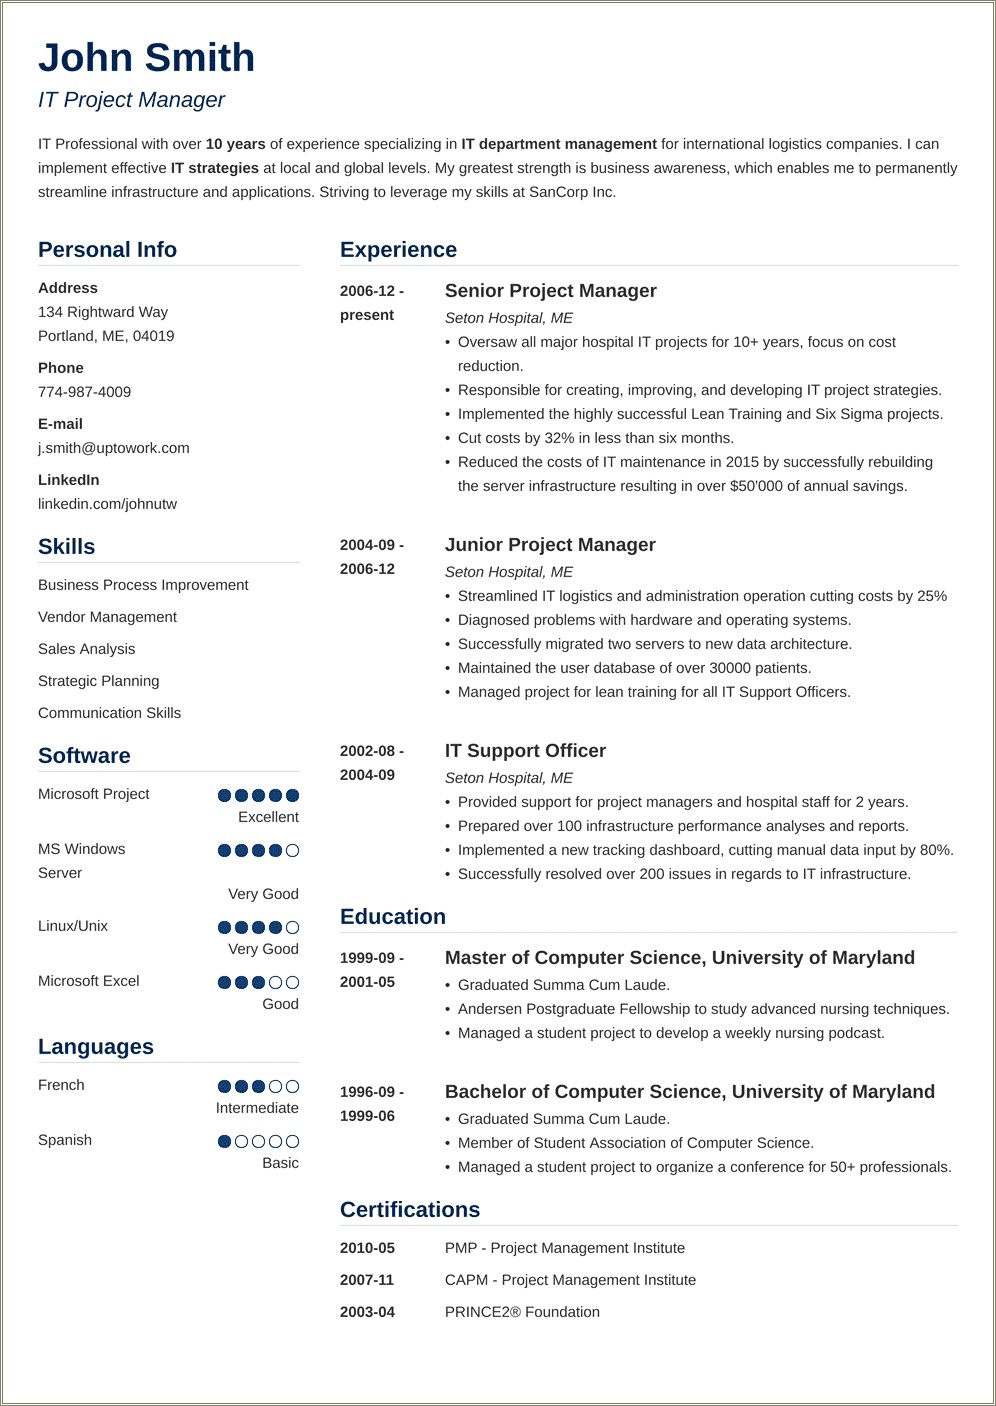 Entry Level Project Manager Sample Resume